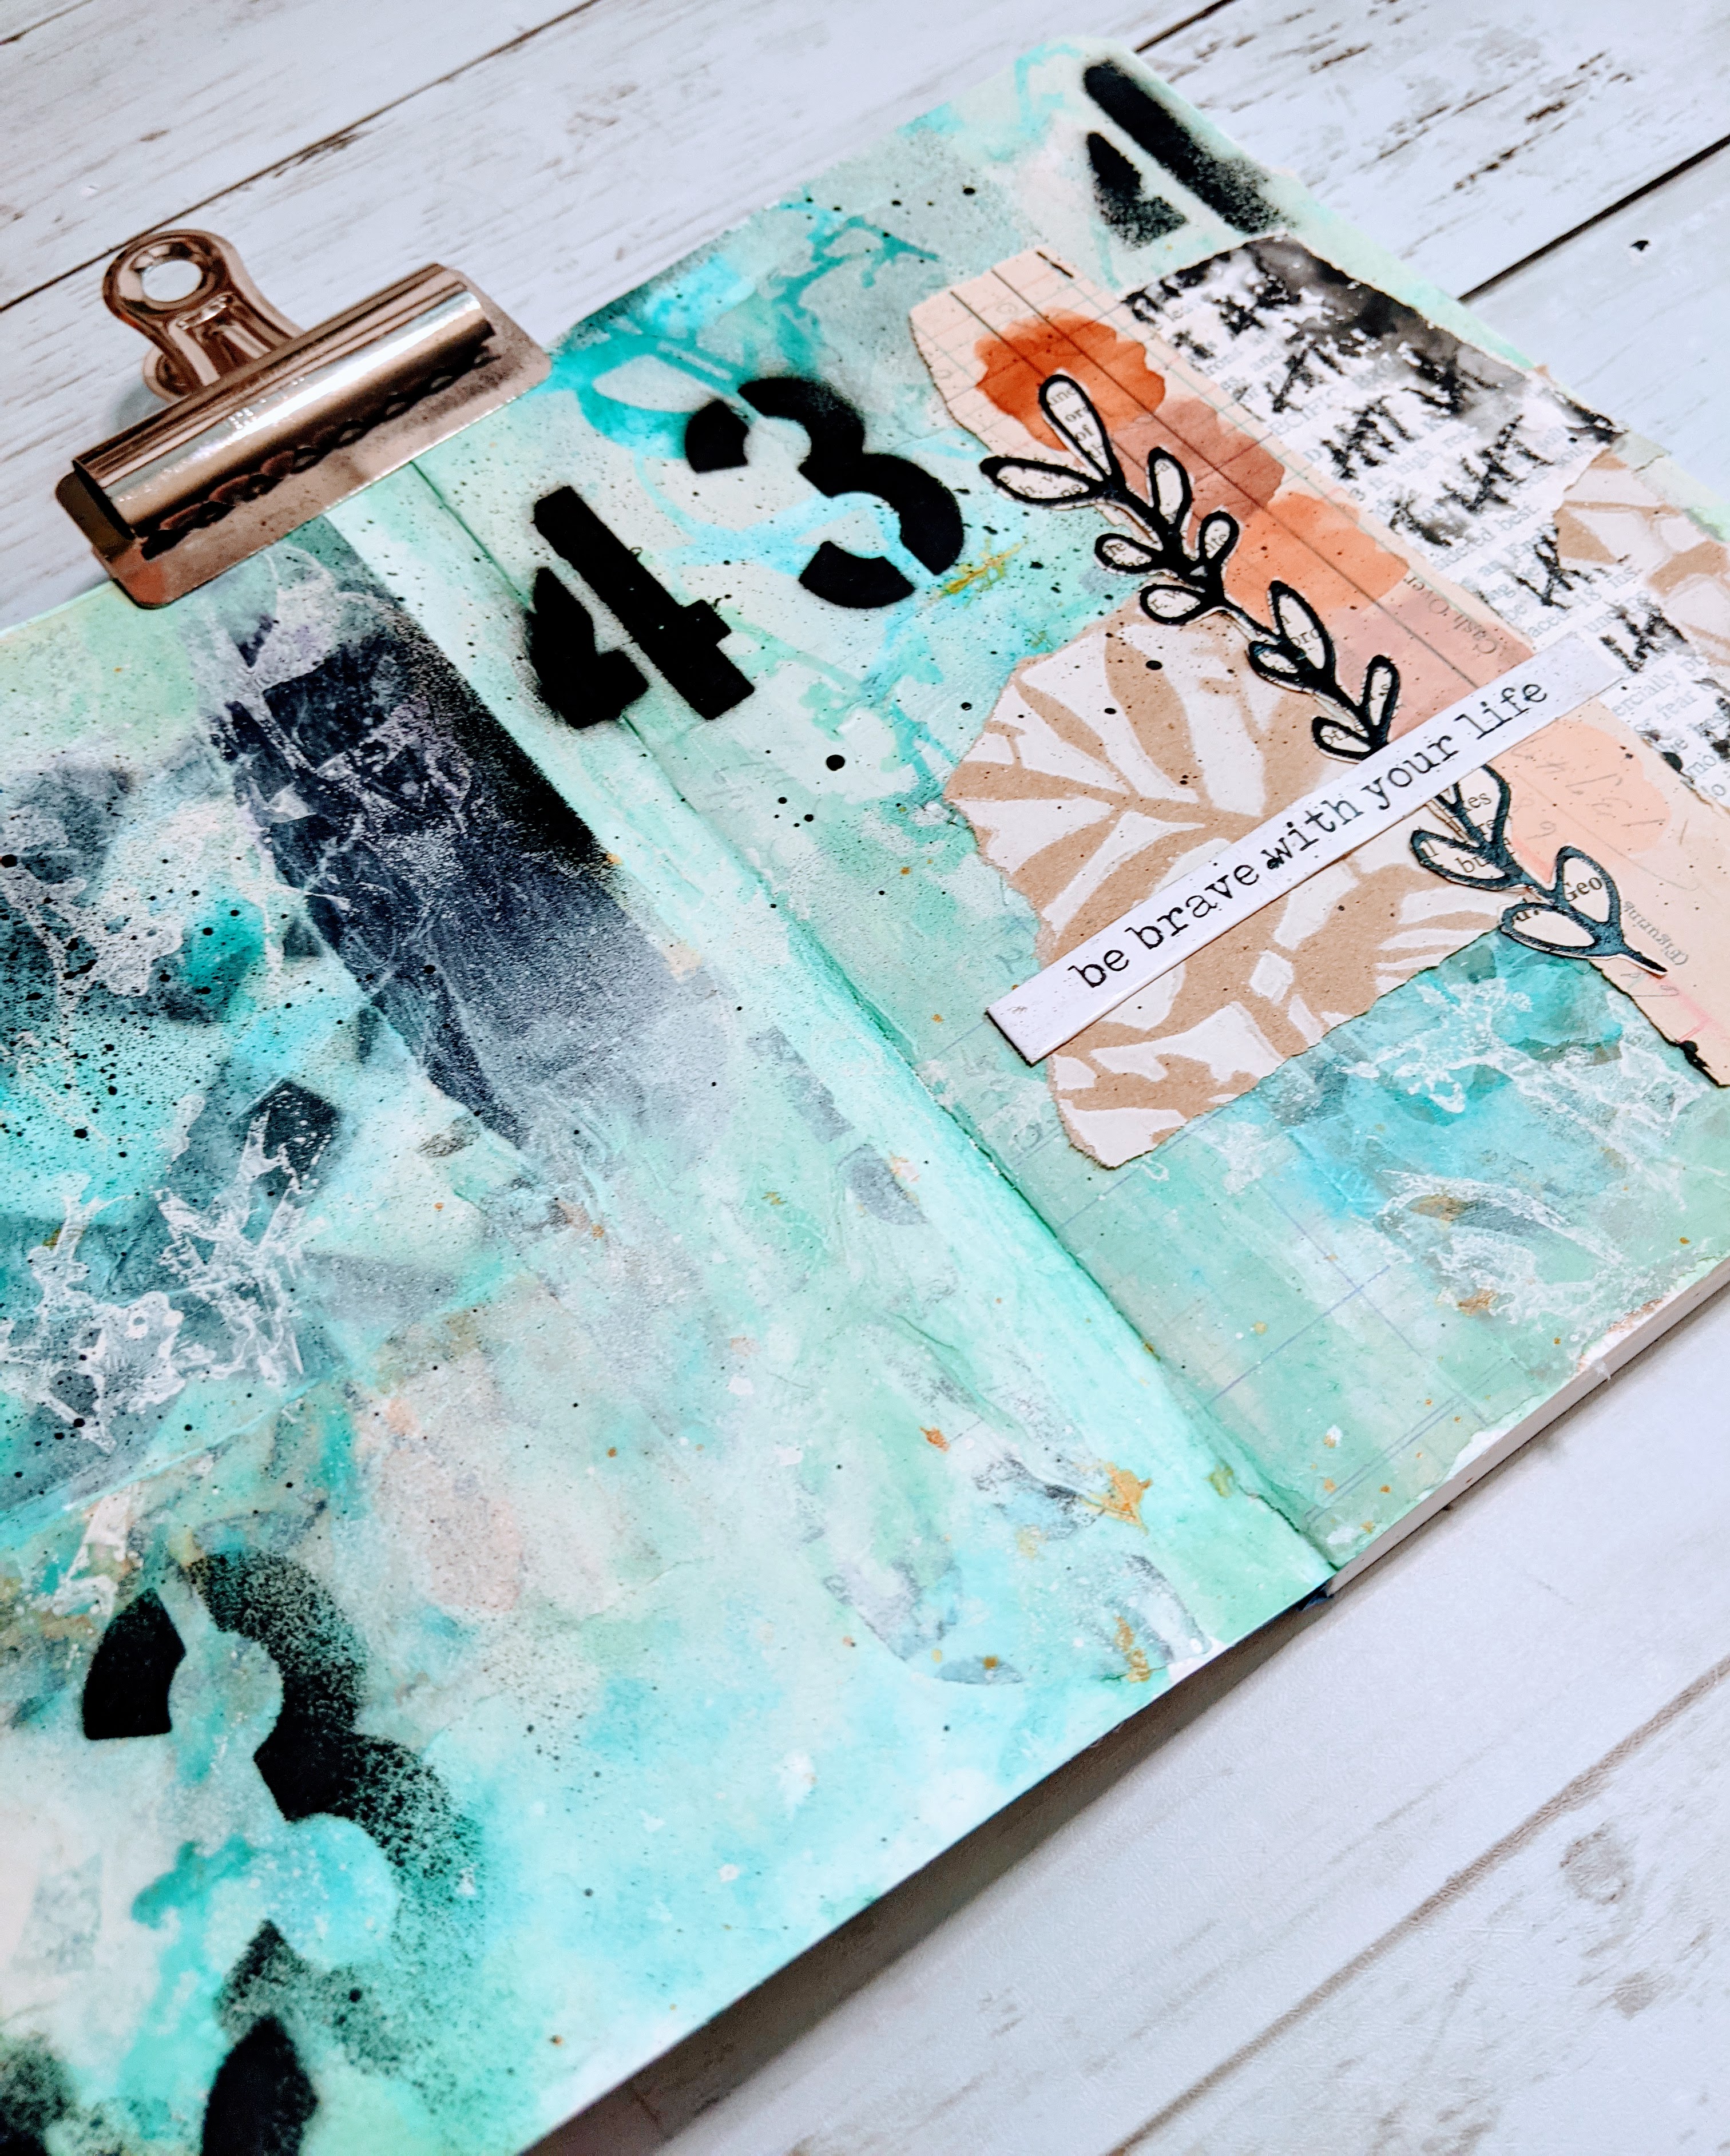 My First Mixed Media Art Journal  Art Journal Page with Distress Oxide  Sprays - Laura Volpes